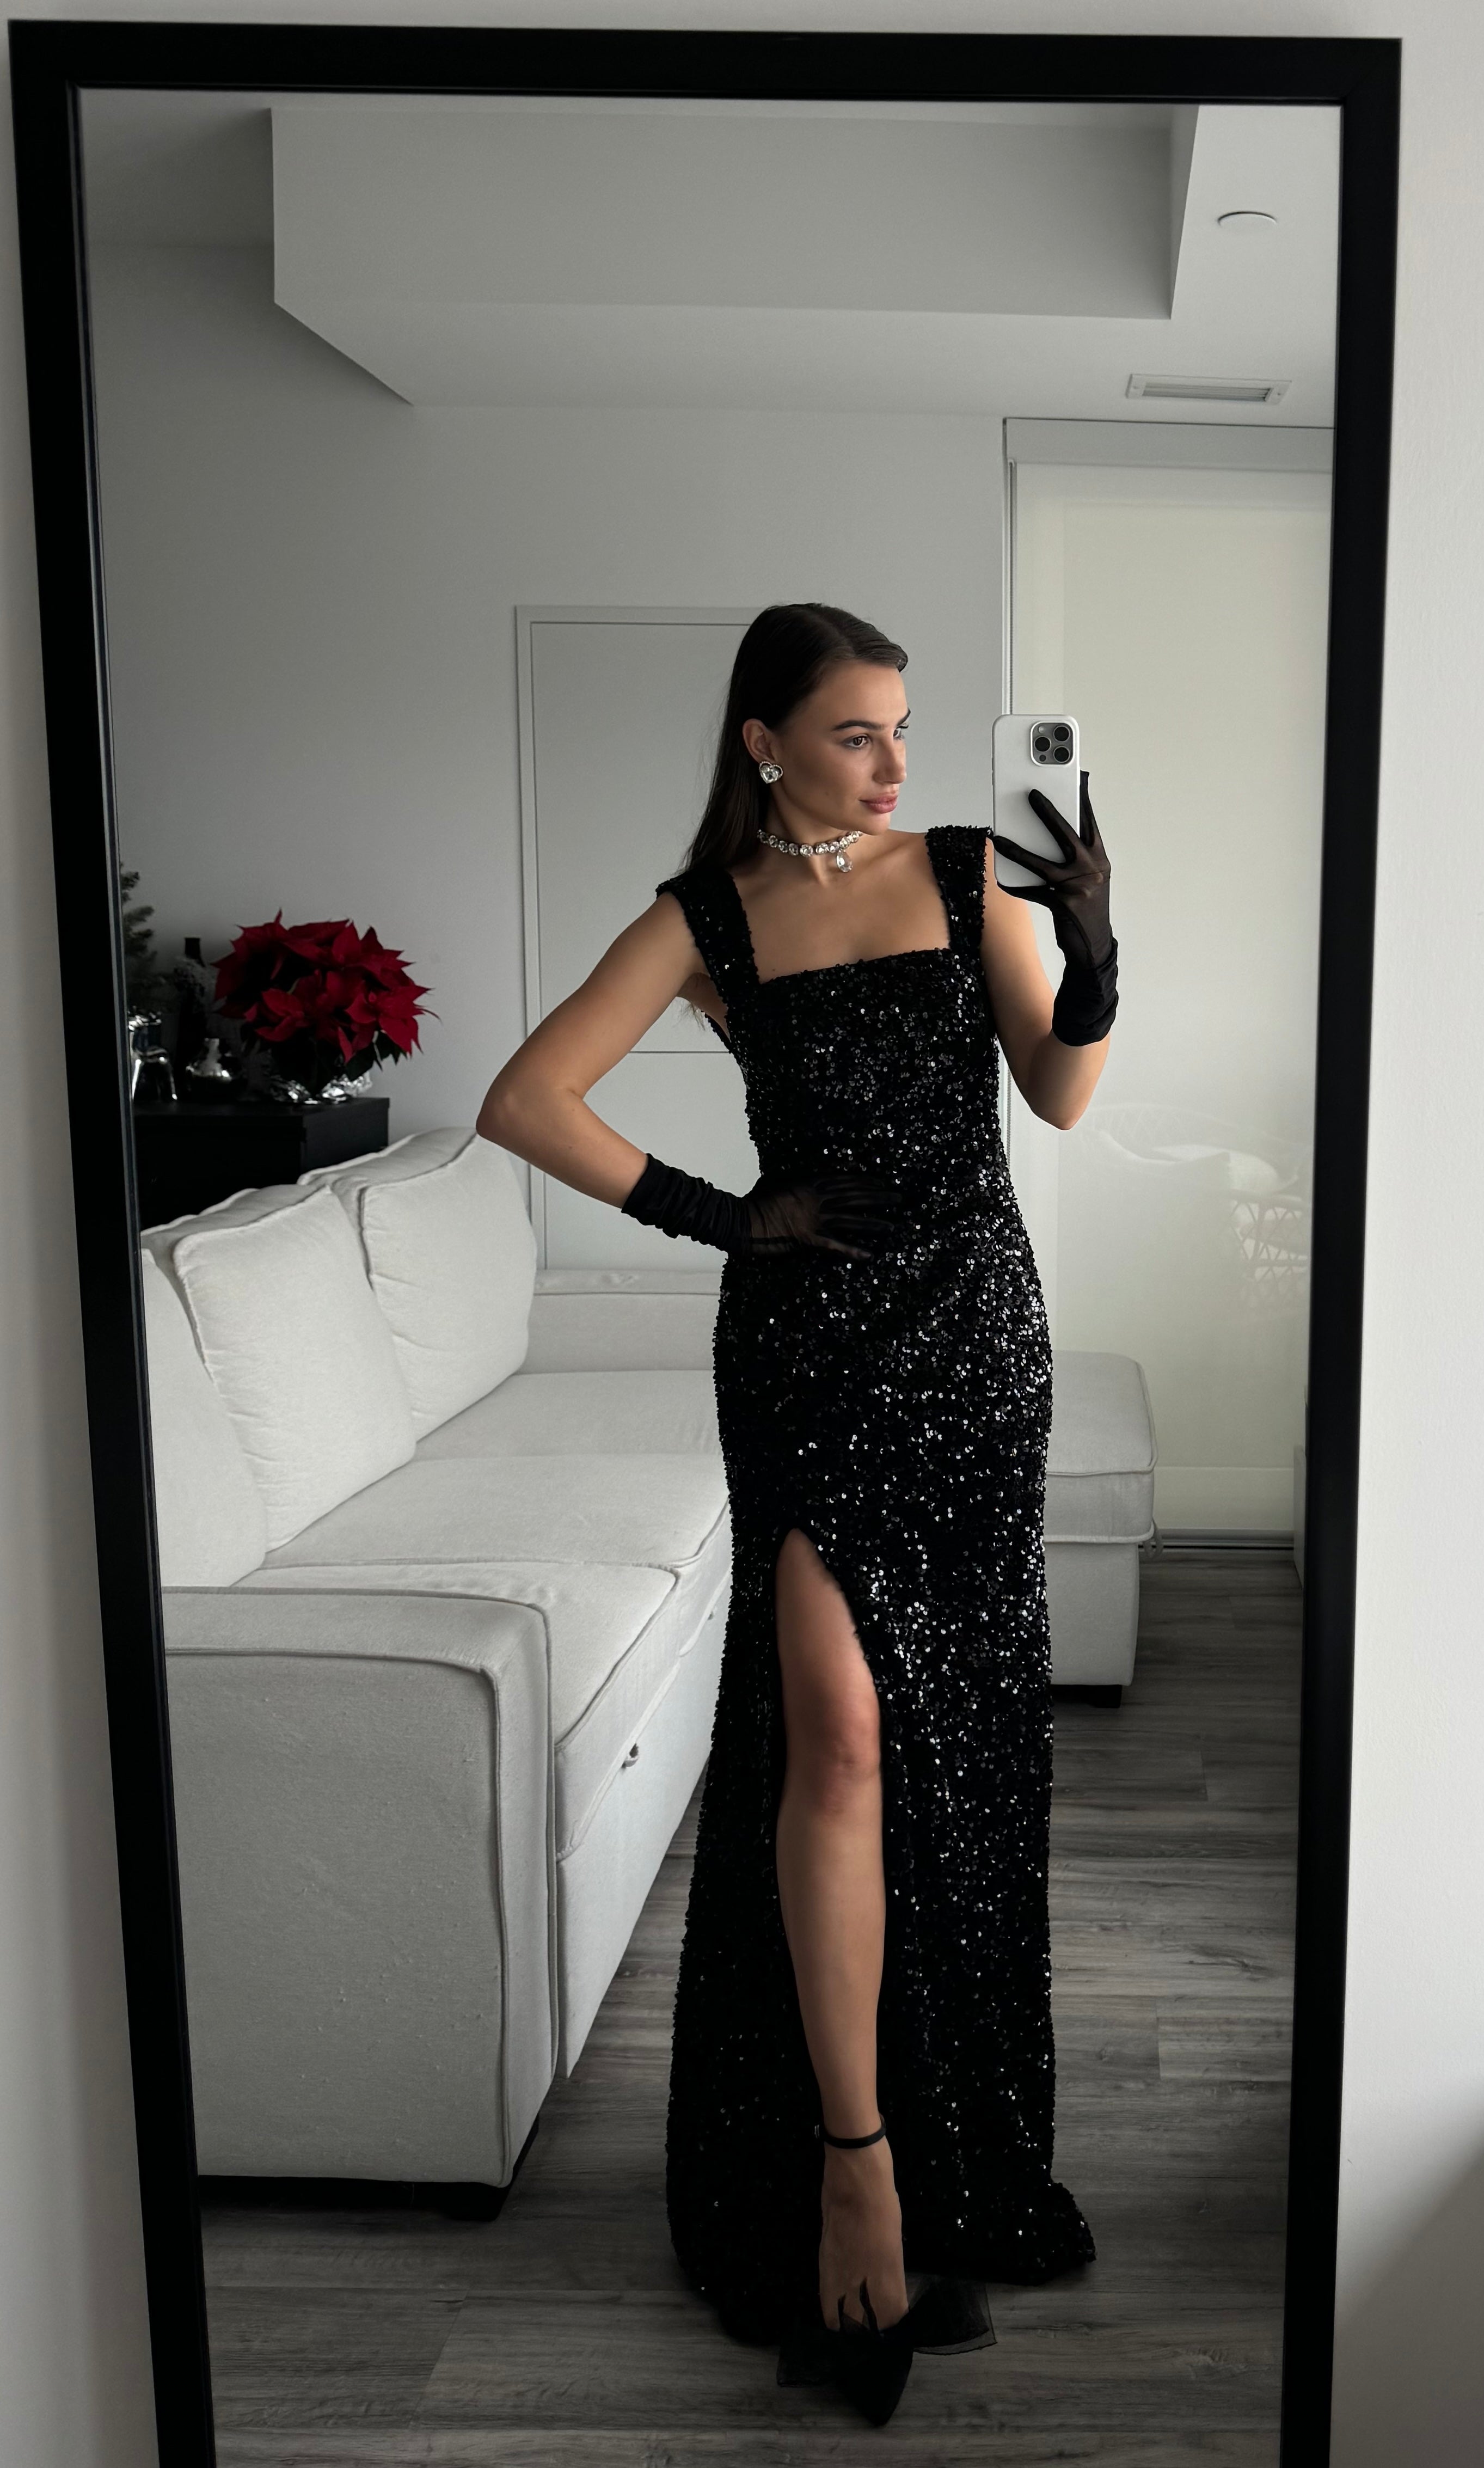 Where to rent cocktail dresses and gowns in Singapore | Honeycombers